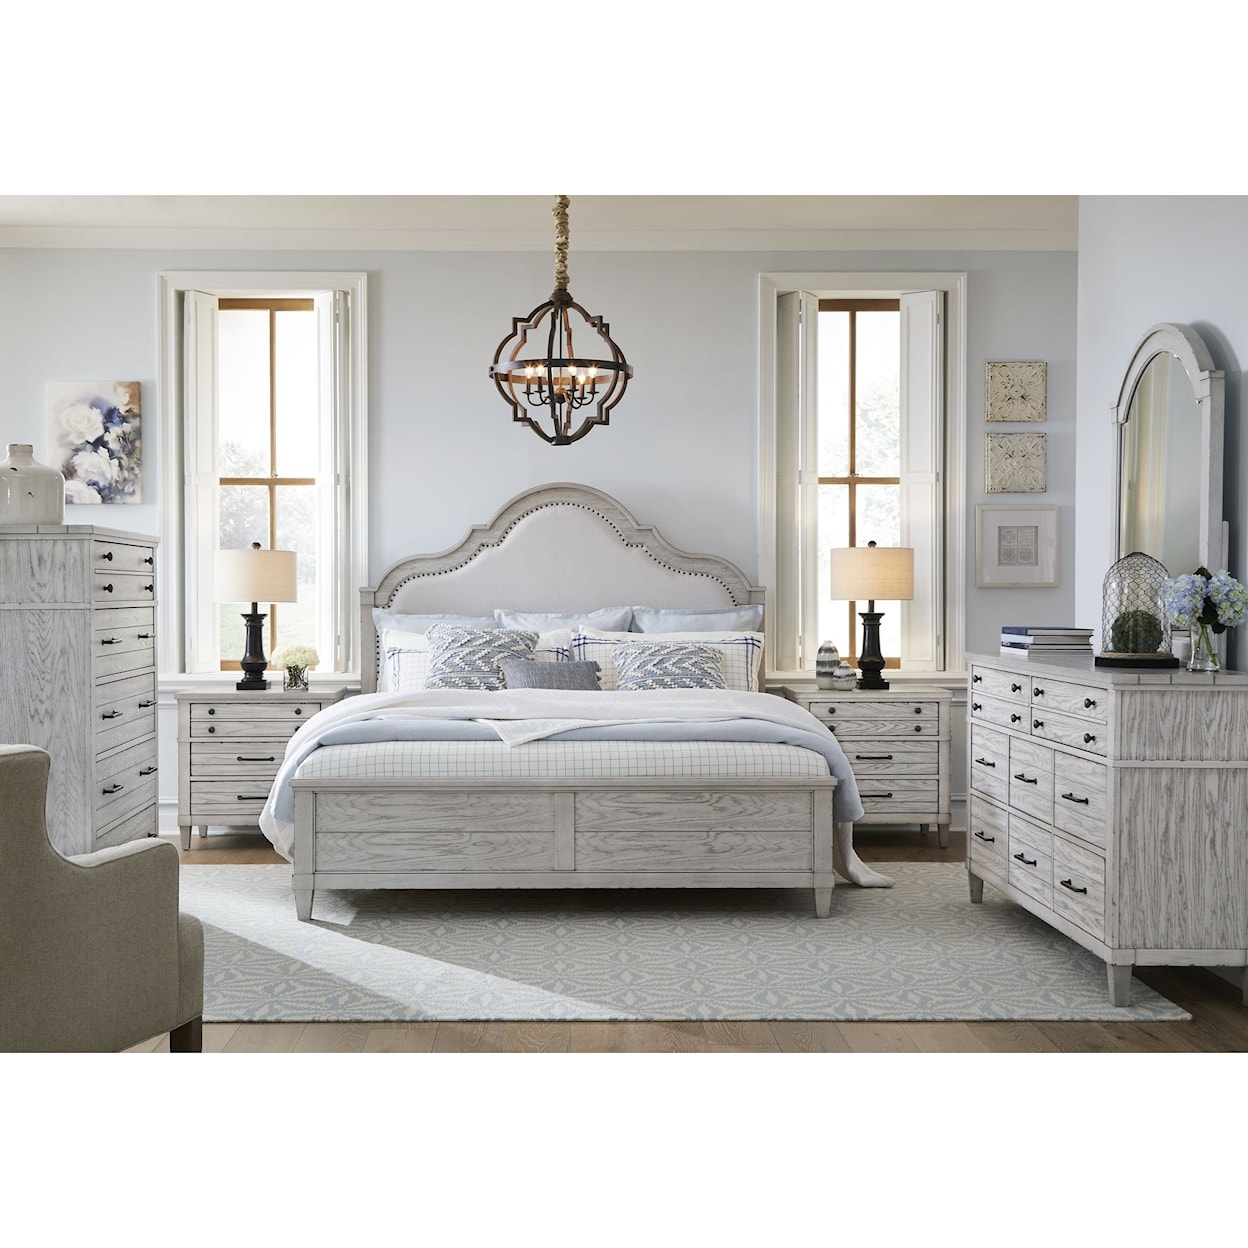 Legacy Classic Belhaven California King Bedroom Group